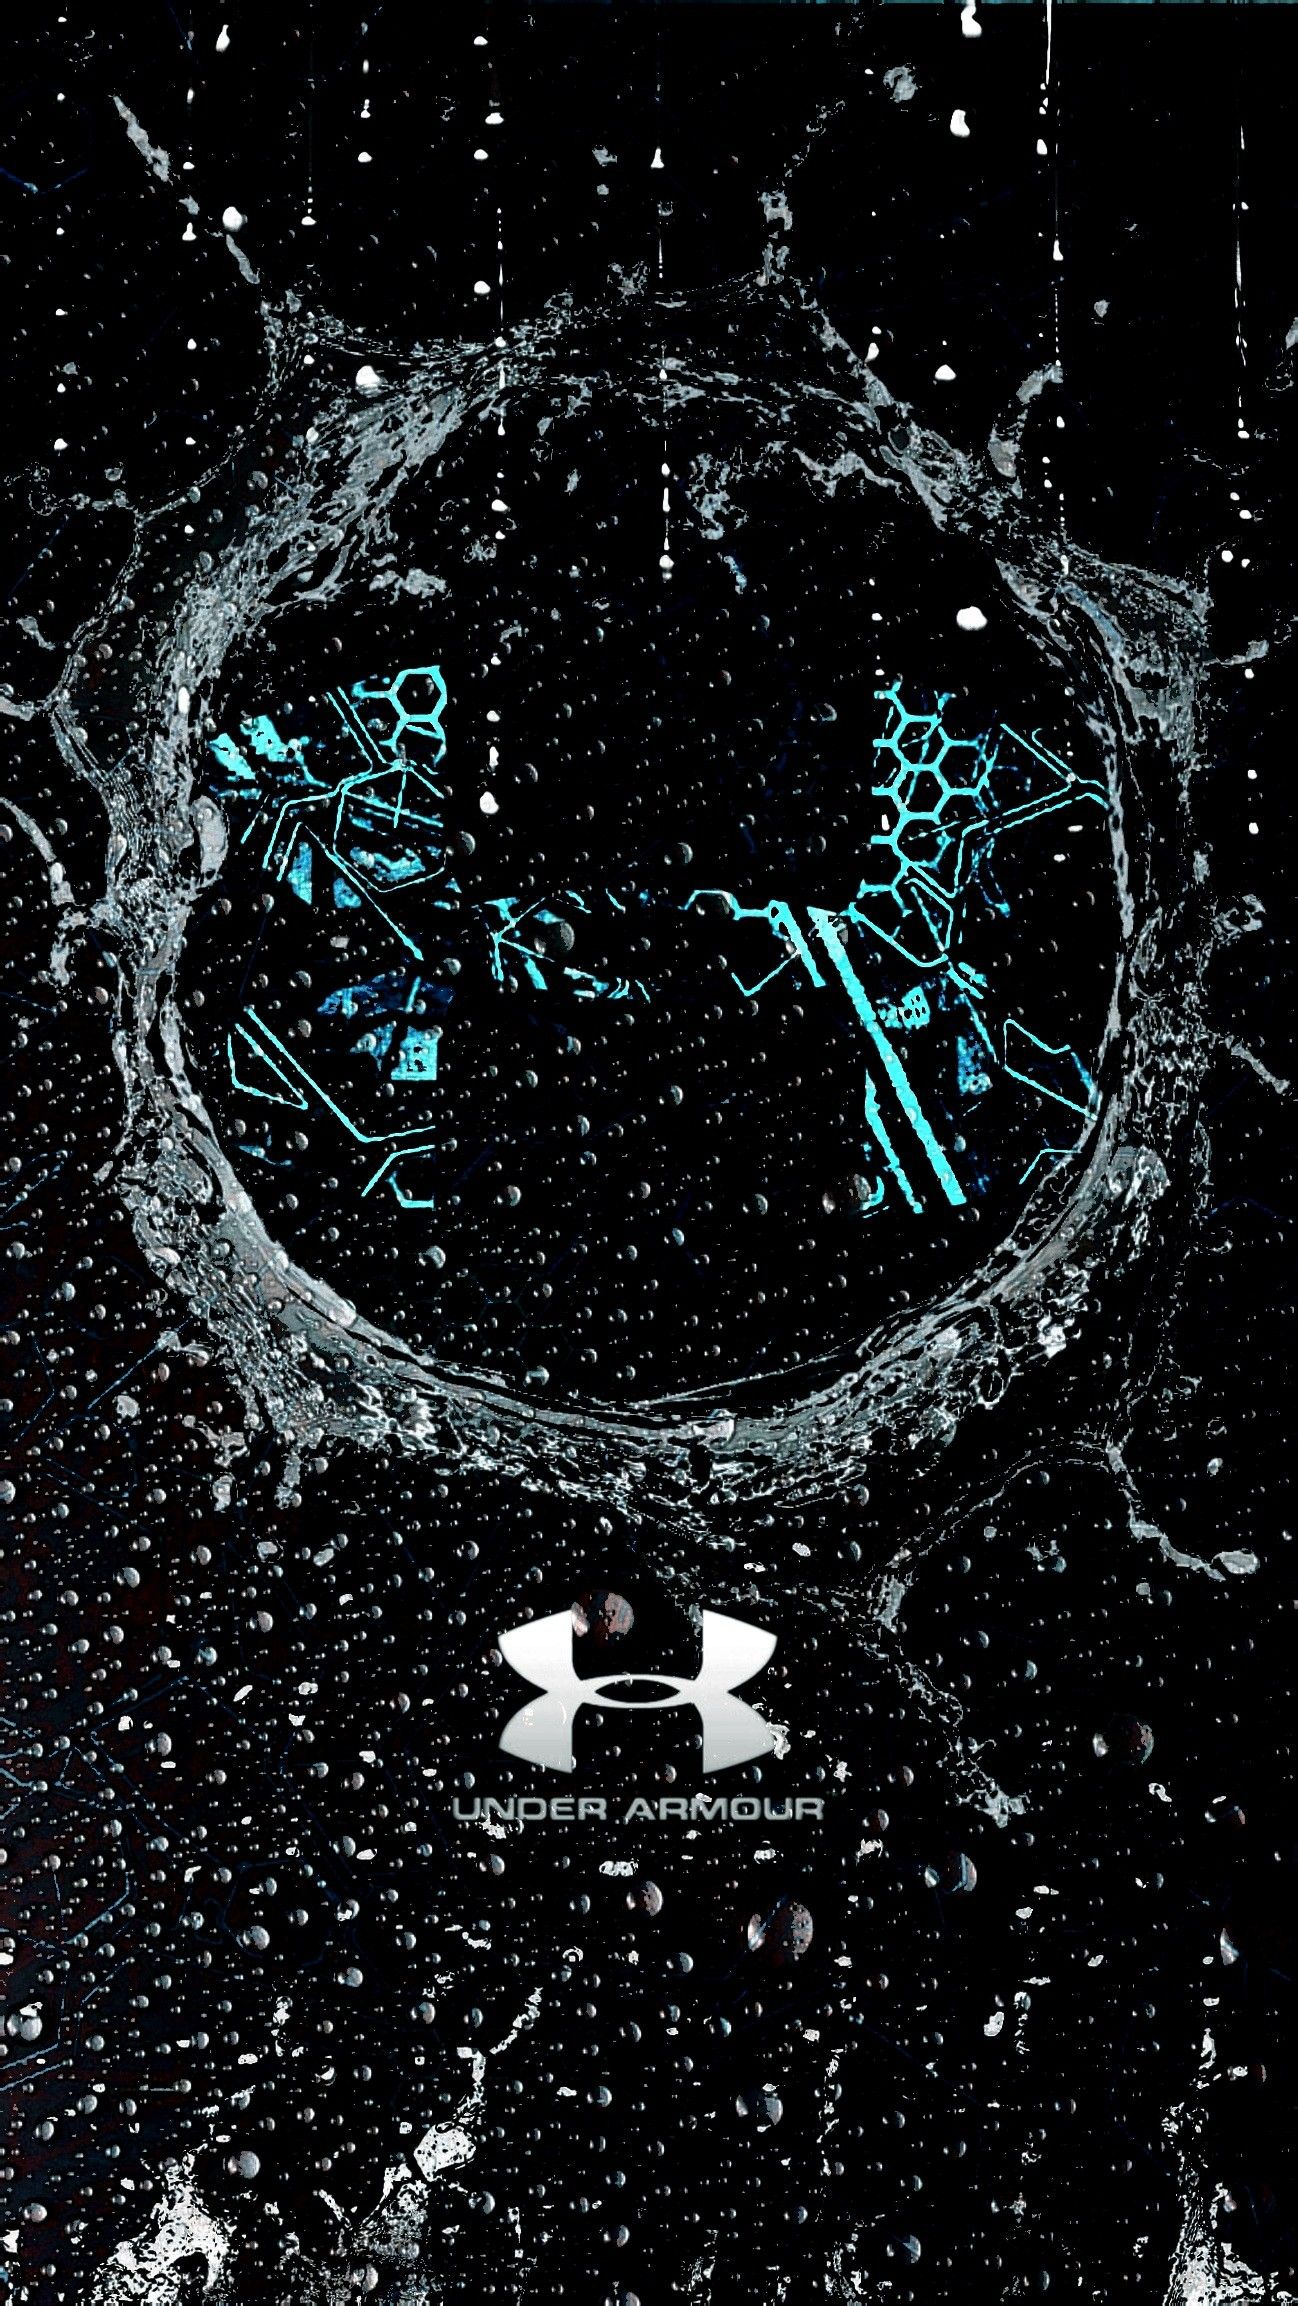 Under Armour Logo Wallpapers